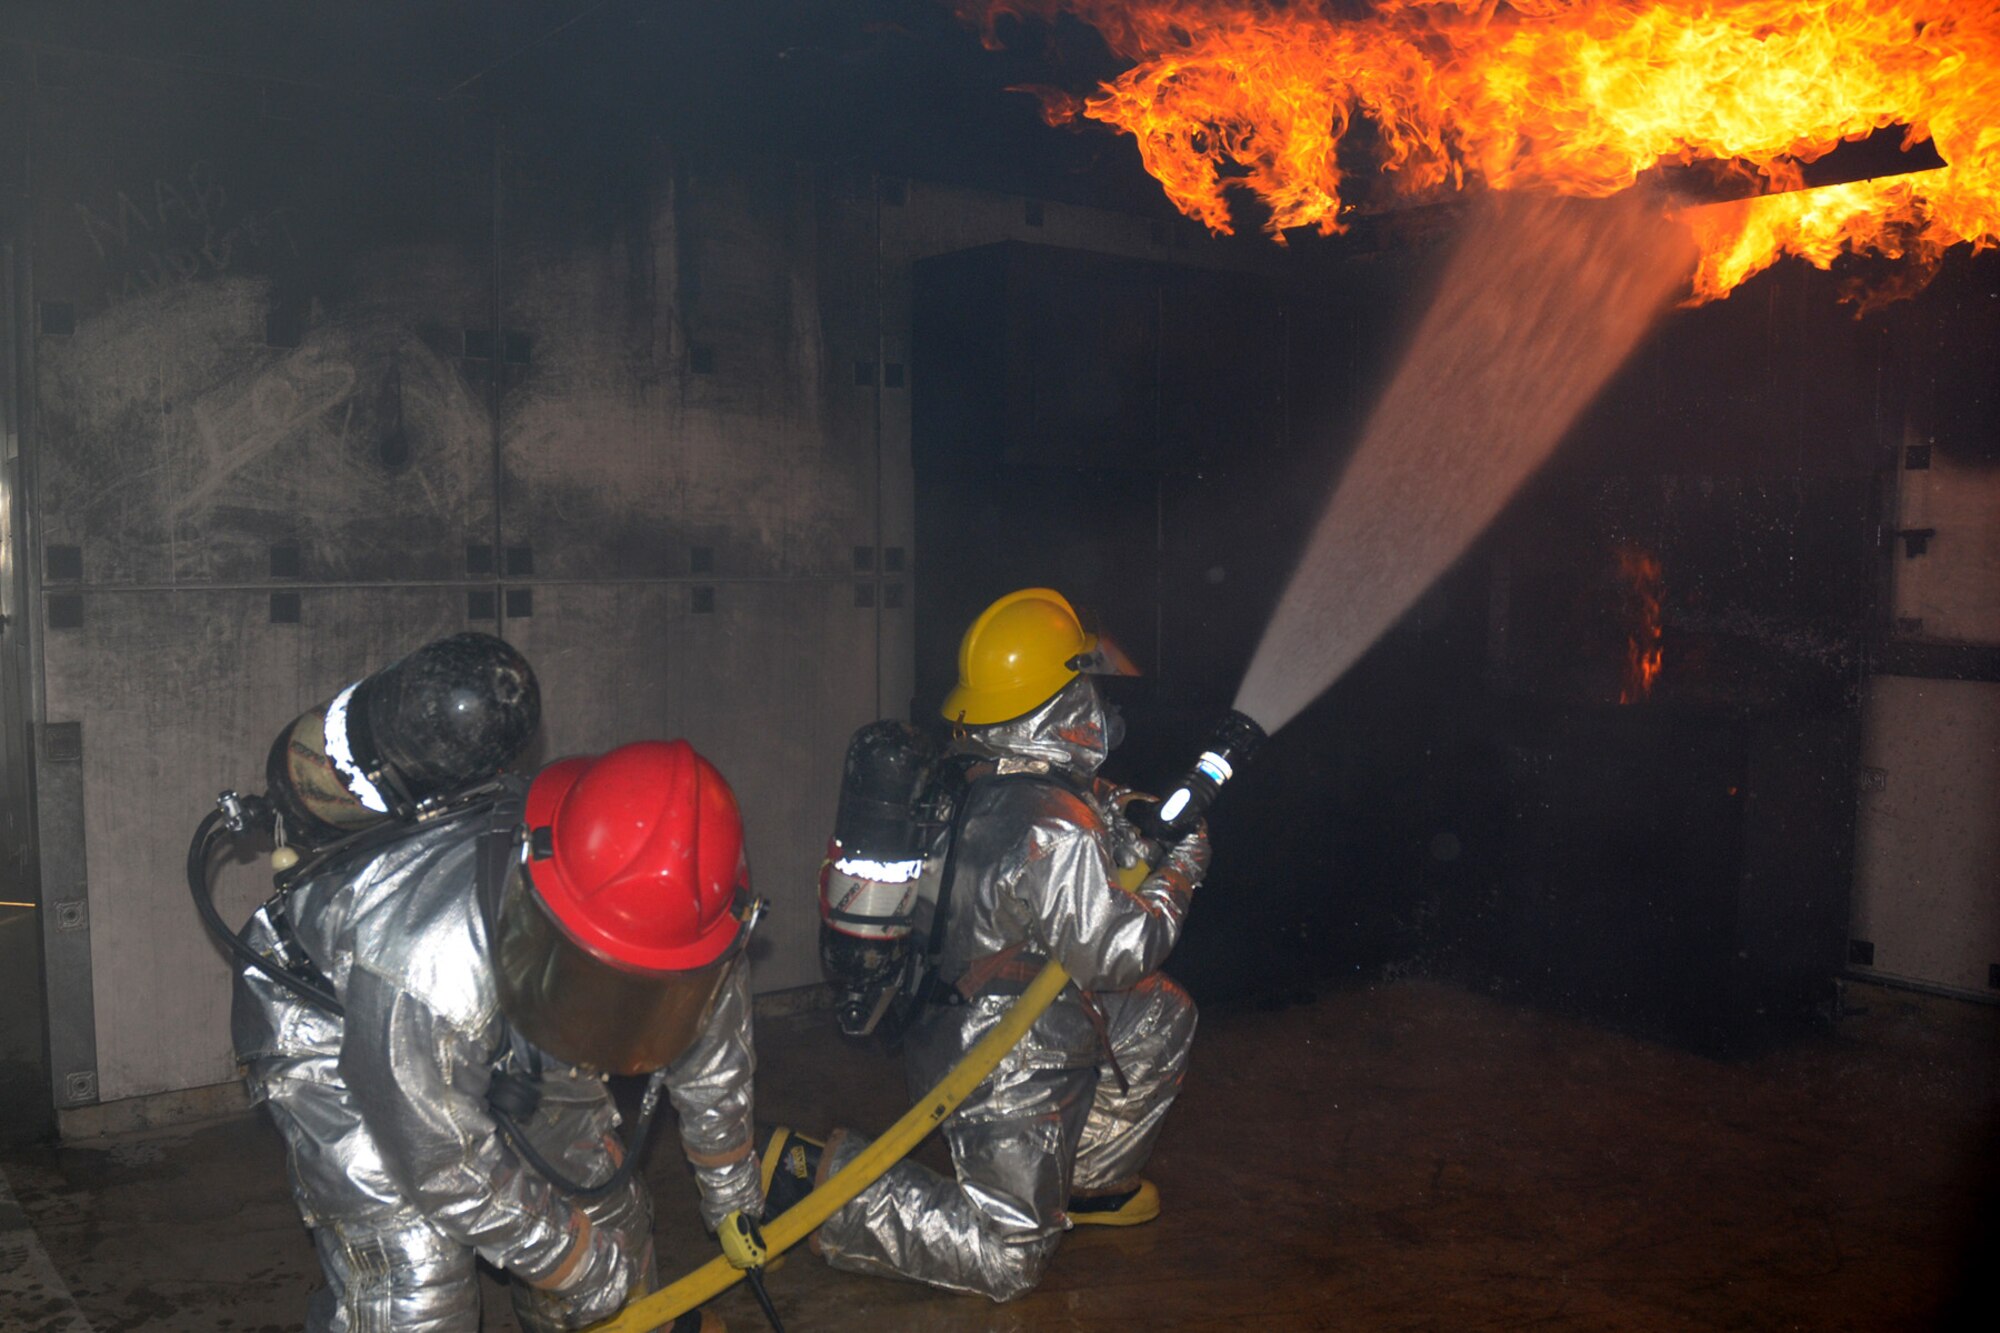 Staff Sgt. John Garcia (right) and Airman 1st Class Vincent Kinard, 18th Civil Engineering Squadron Fire Department, work together to put out the flames in a simulated kitchen fire at the Silver Flag Training Facility Dec. 2 at Kadena Air Base. The 18th Wing is participating in a Local Operational Readiness Exercise to test the readiness of Kadena Airmen.(U.S. Air Force photo/Airman 1st Class Amanda Grabiec)